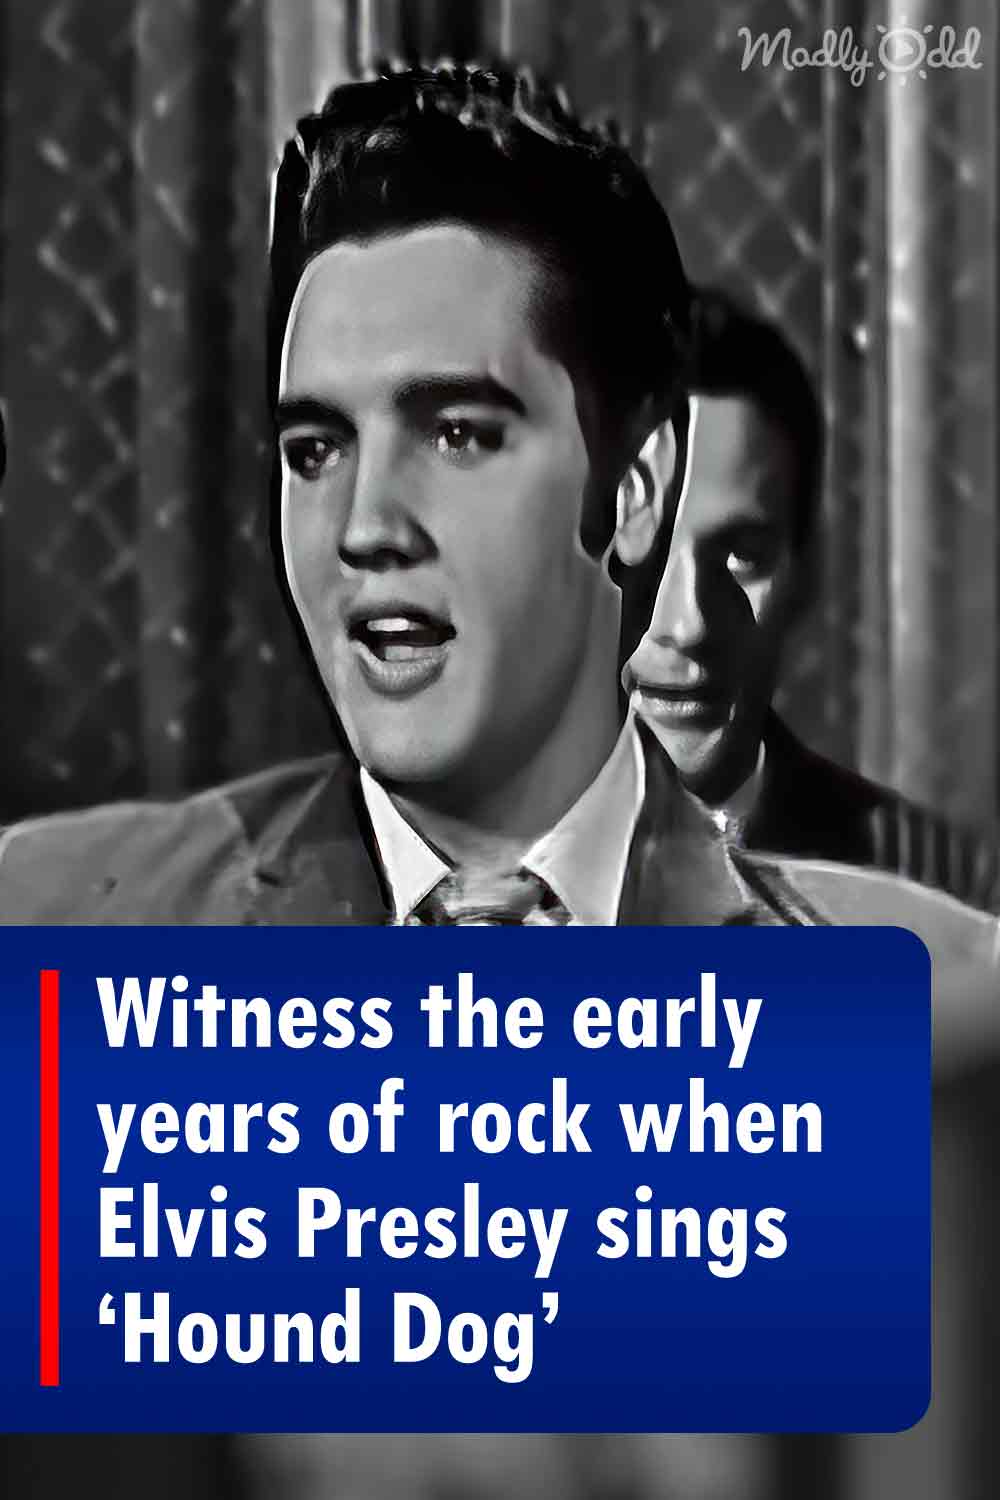 Witness the early years of rock when Elvis Presley sings \'Hound Dog\'